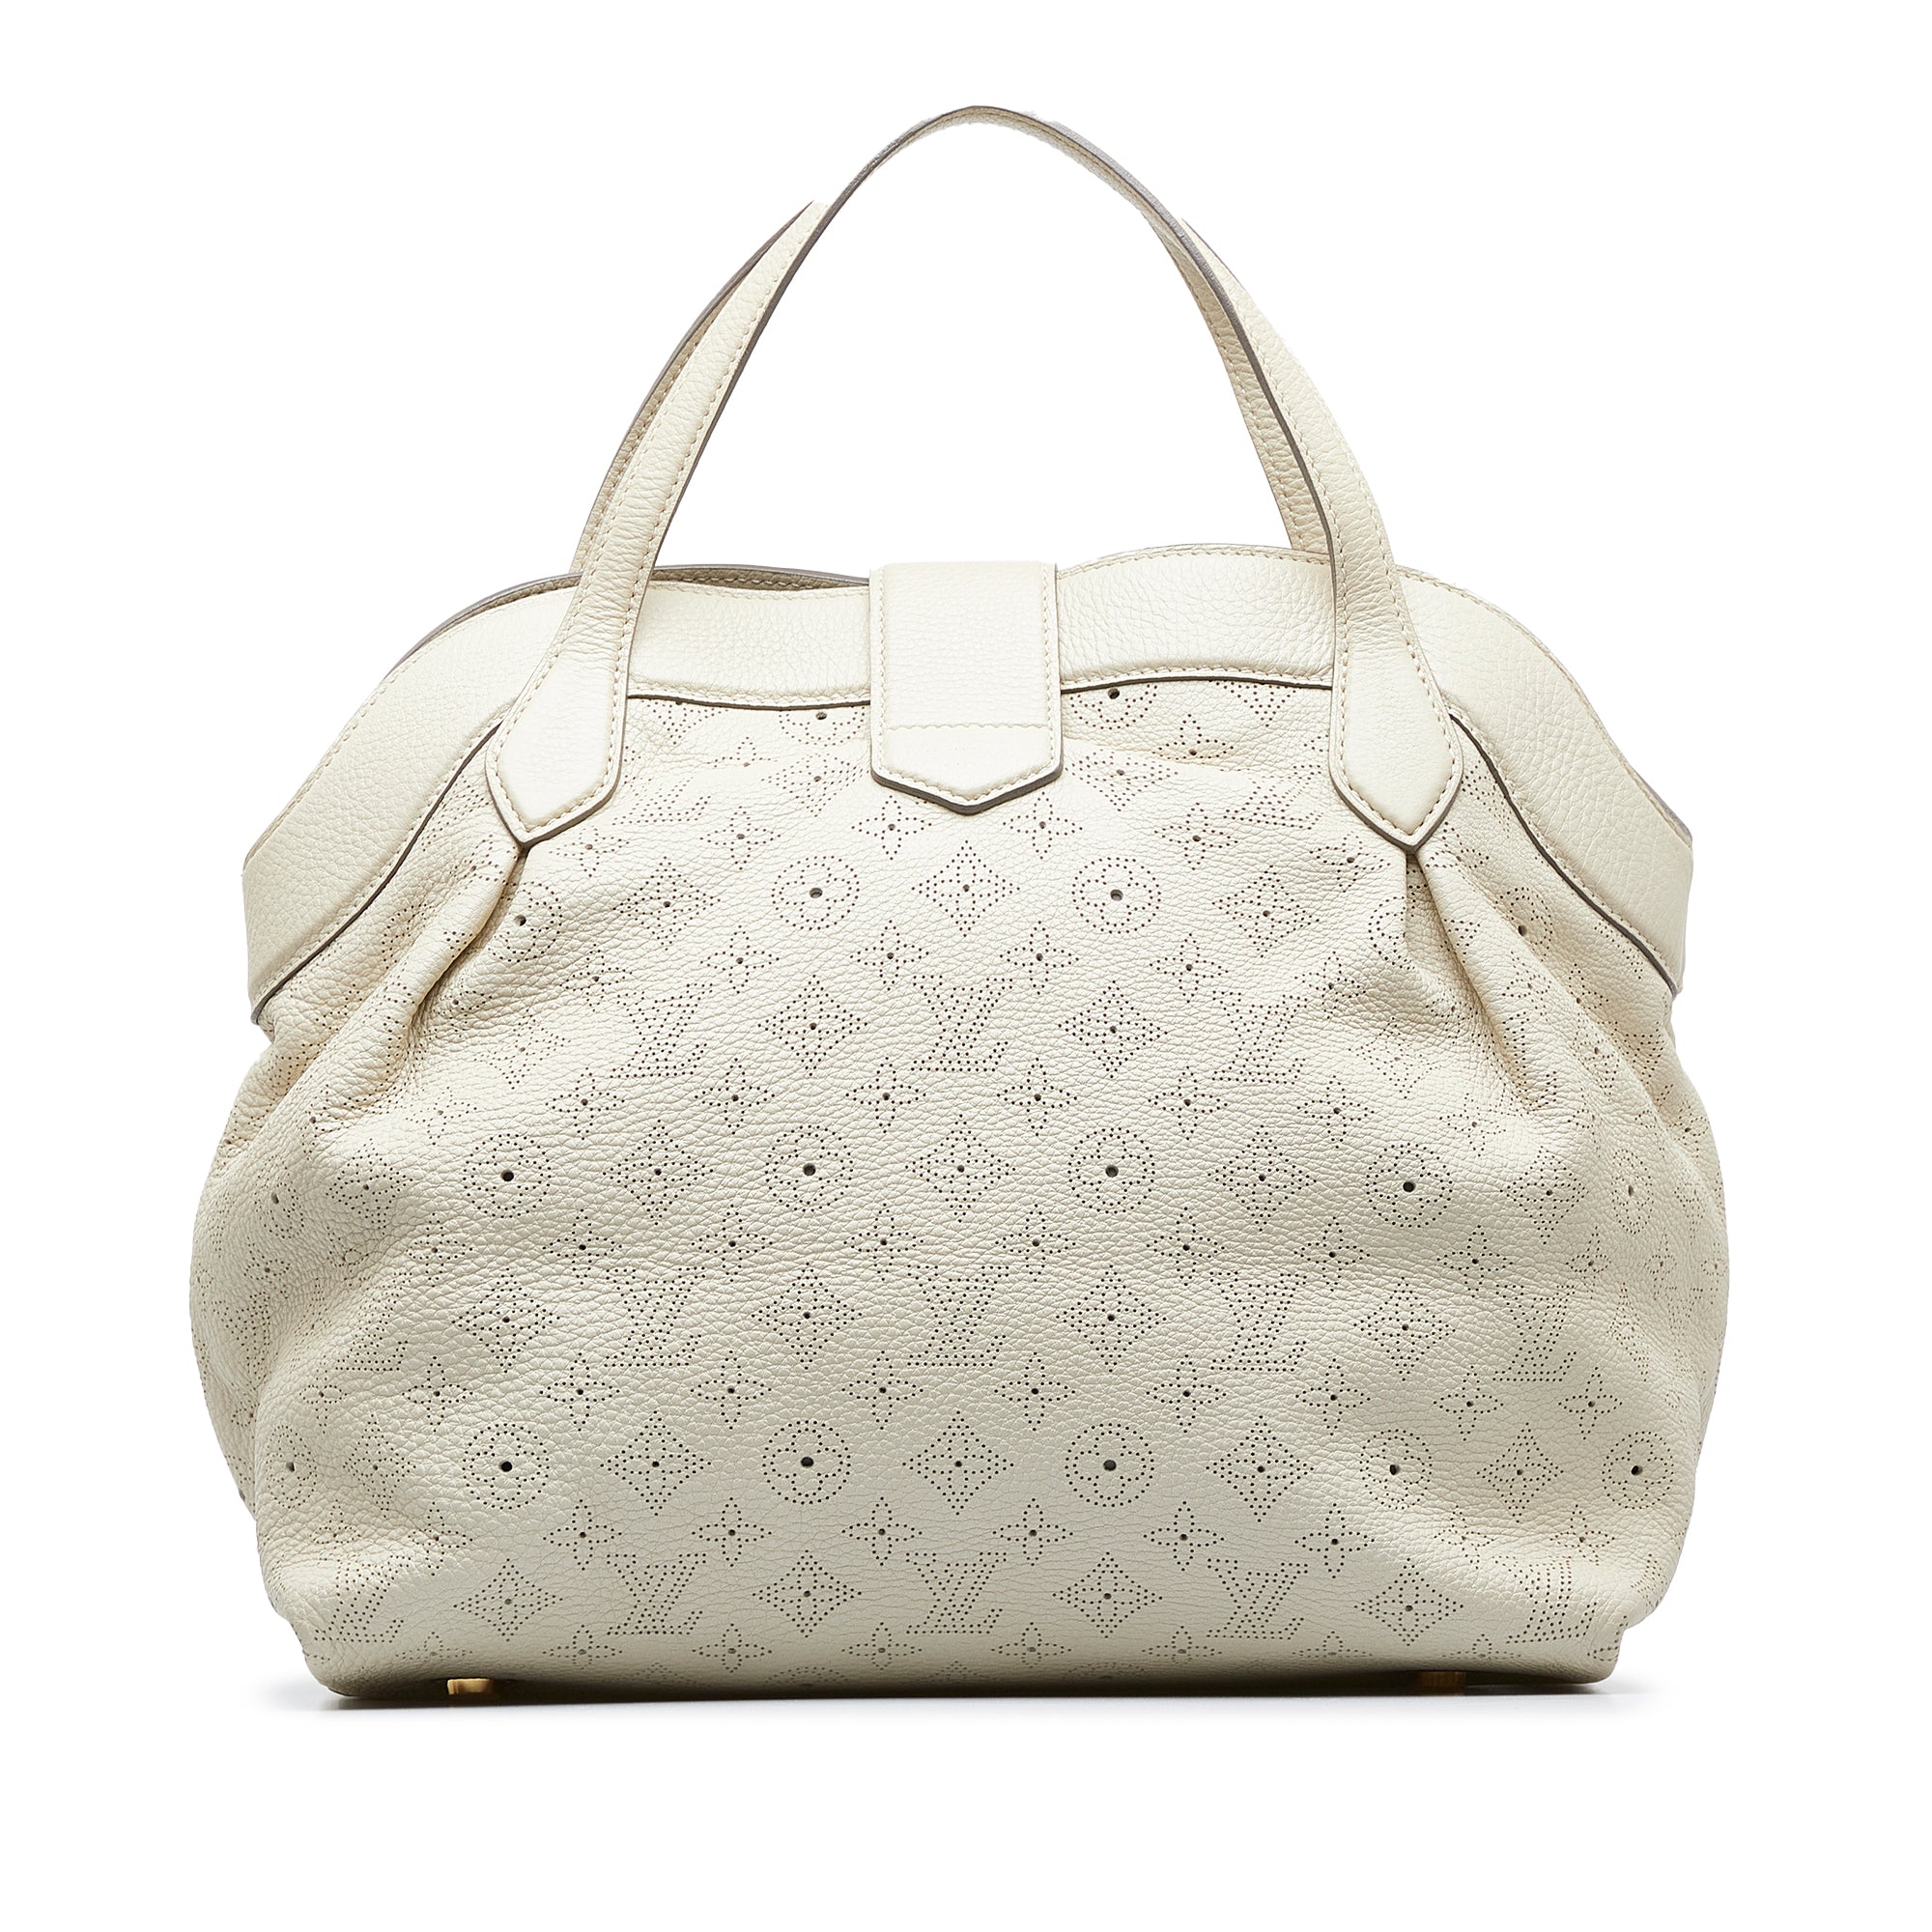 Louis Vuitton - Authenticated Mahina Handbag - Leather White for Women, Very Good Condition